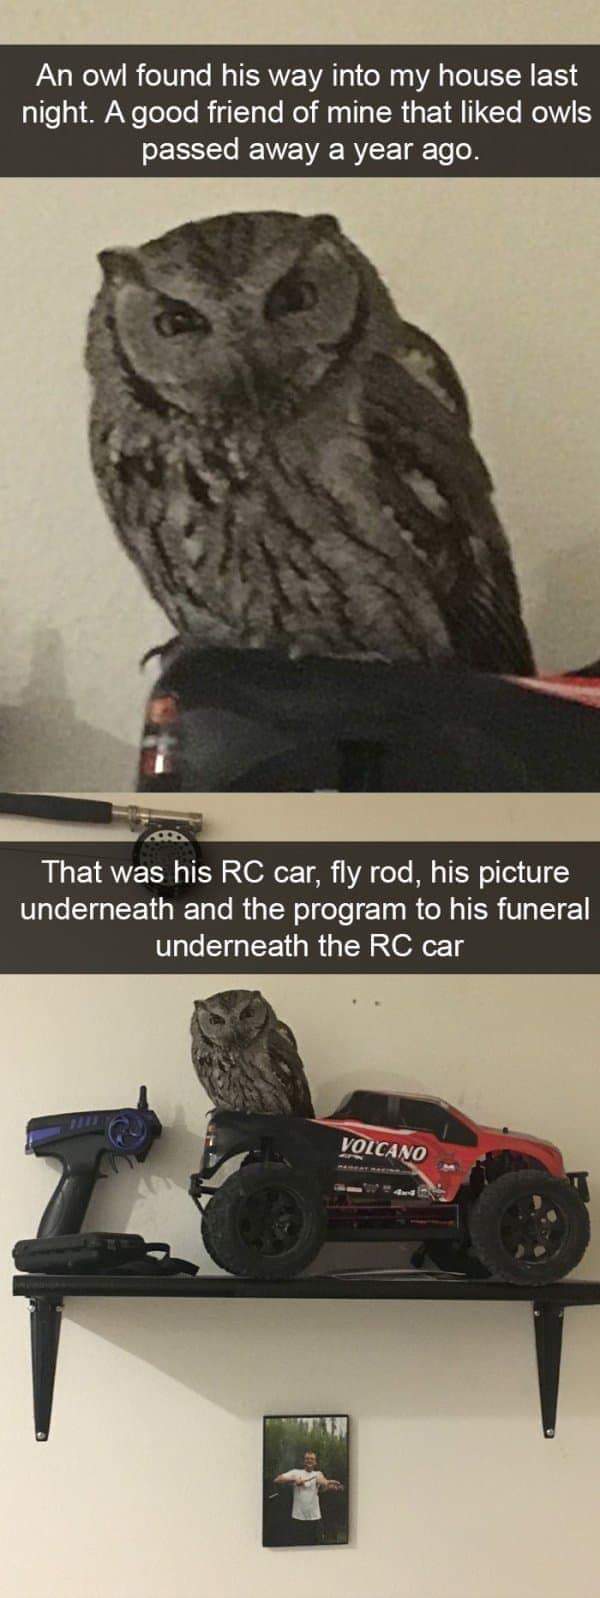 owls snapchat - An owl found his way into my house last night. A good friend of mine that d owls passed away a year ago. That was his Rc car, fly rod, his picture underneath and the program to his funeral underneath the Rc car Volcano